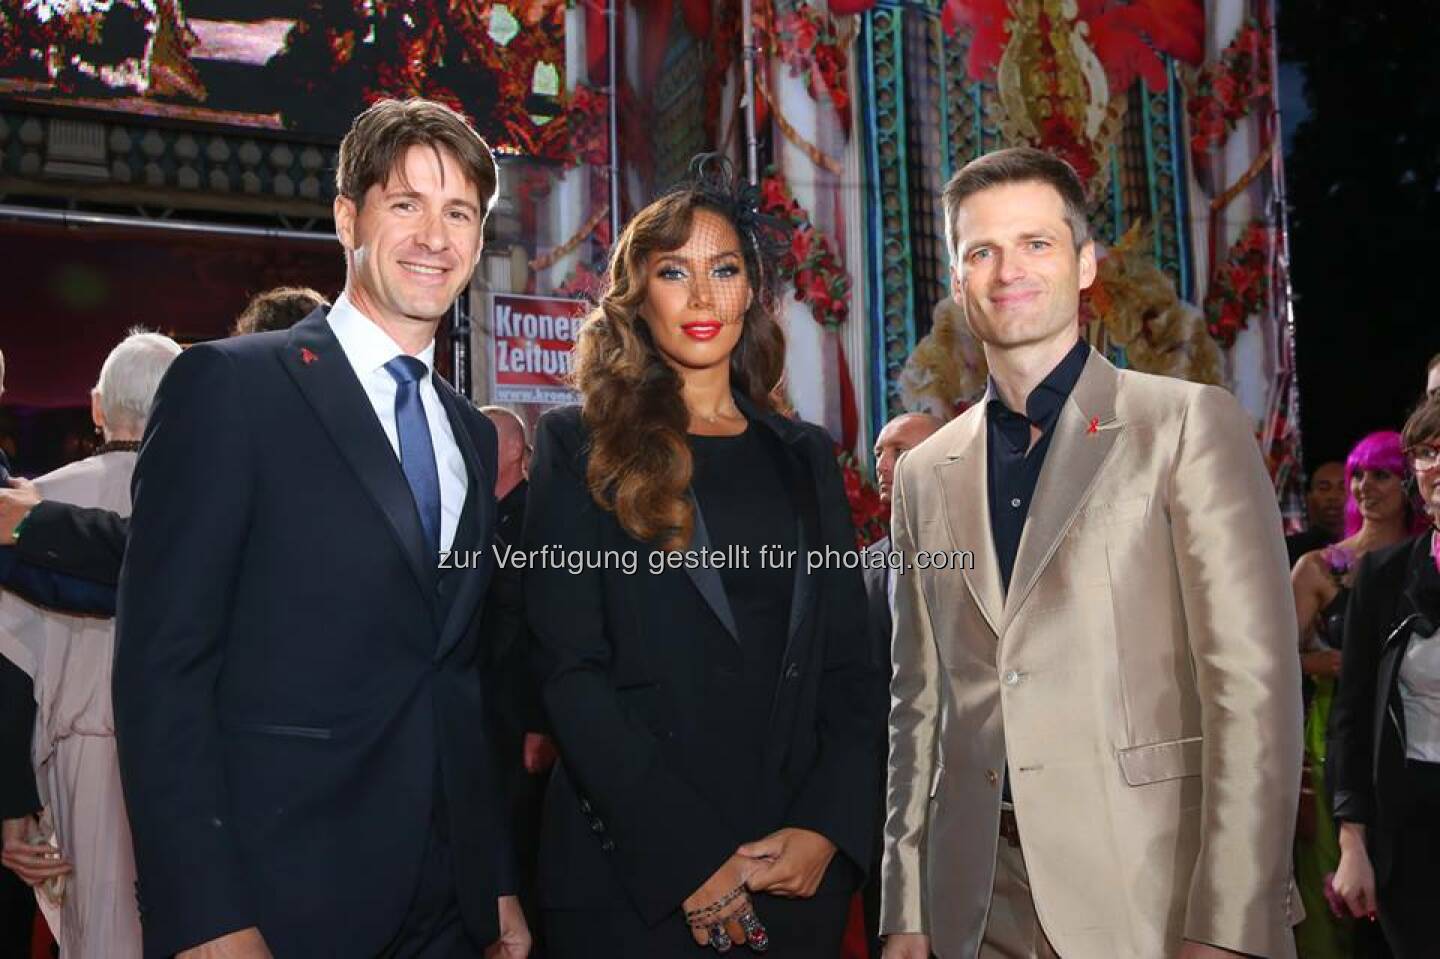 Axel Dreher, Leona Lewis, Thomas Melzer: Leona Lewis, a superstar both on stage and in person. 
Here in a collection of memorable moments with Wolford at the Life Ball 2014.
 Source: http://facebook.com/WolfordFashion